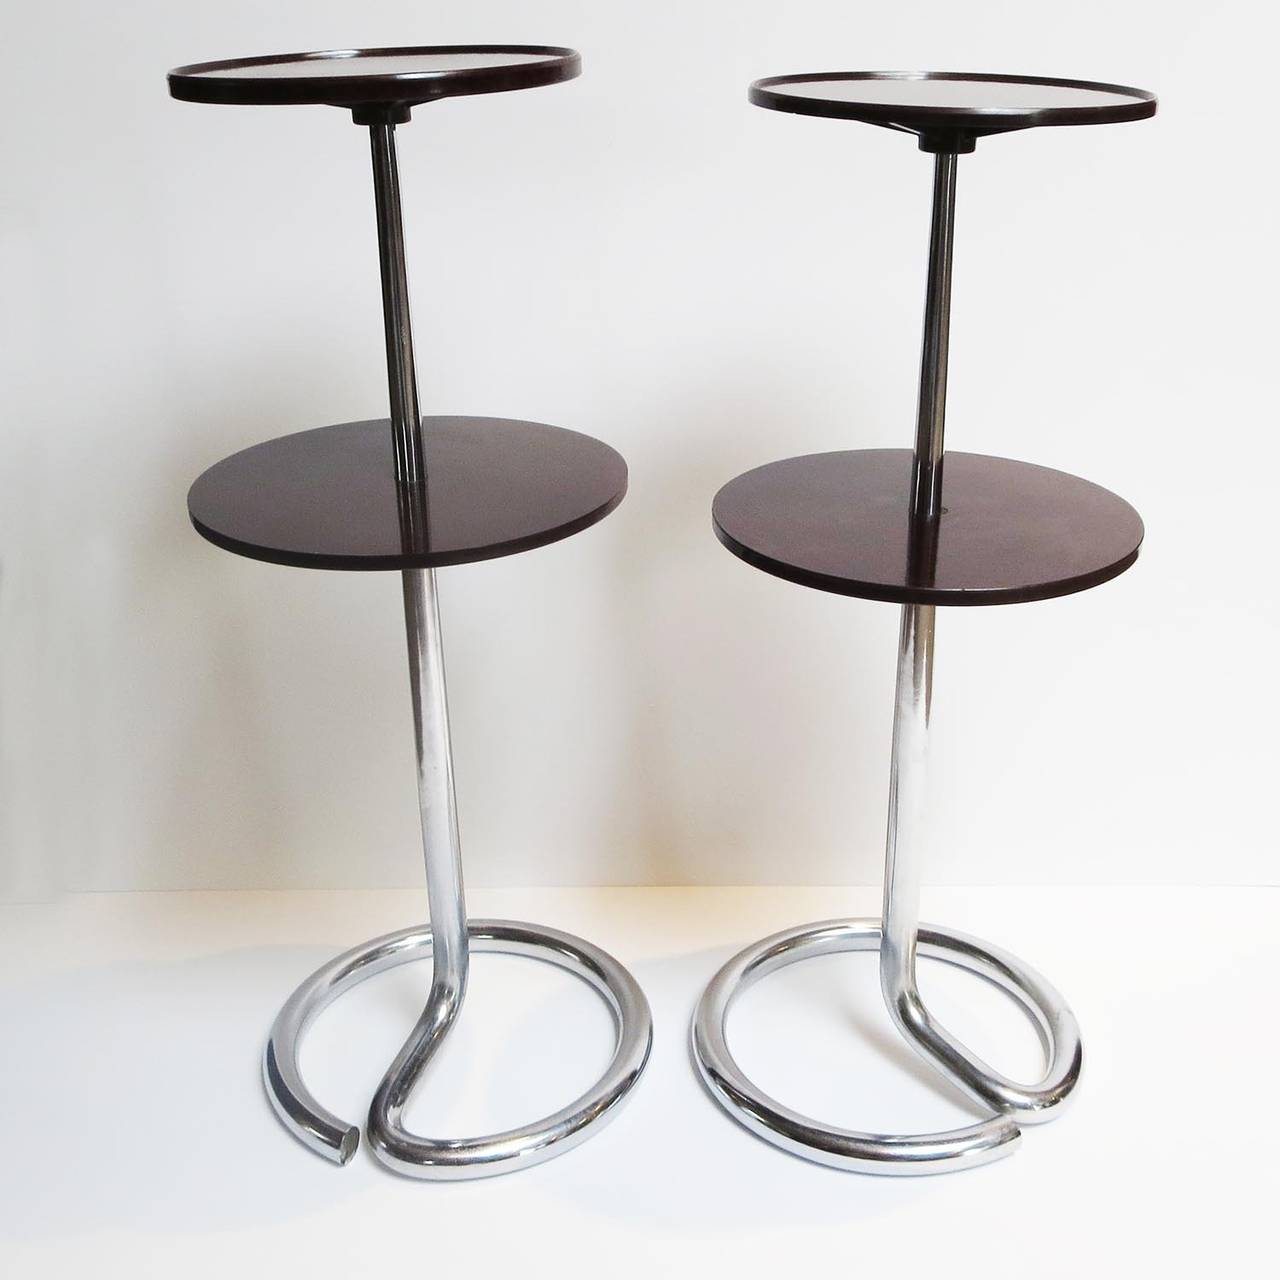 This lovely pair have often been attributed to French designer Rene Herbst, but no documentation has yet substantiated this. The pair is wonderful and unique, and the perfect scale for a cocktail! The top tier measures 7 inches in diameter, while